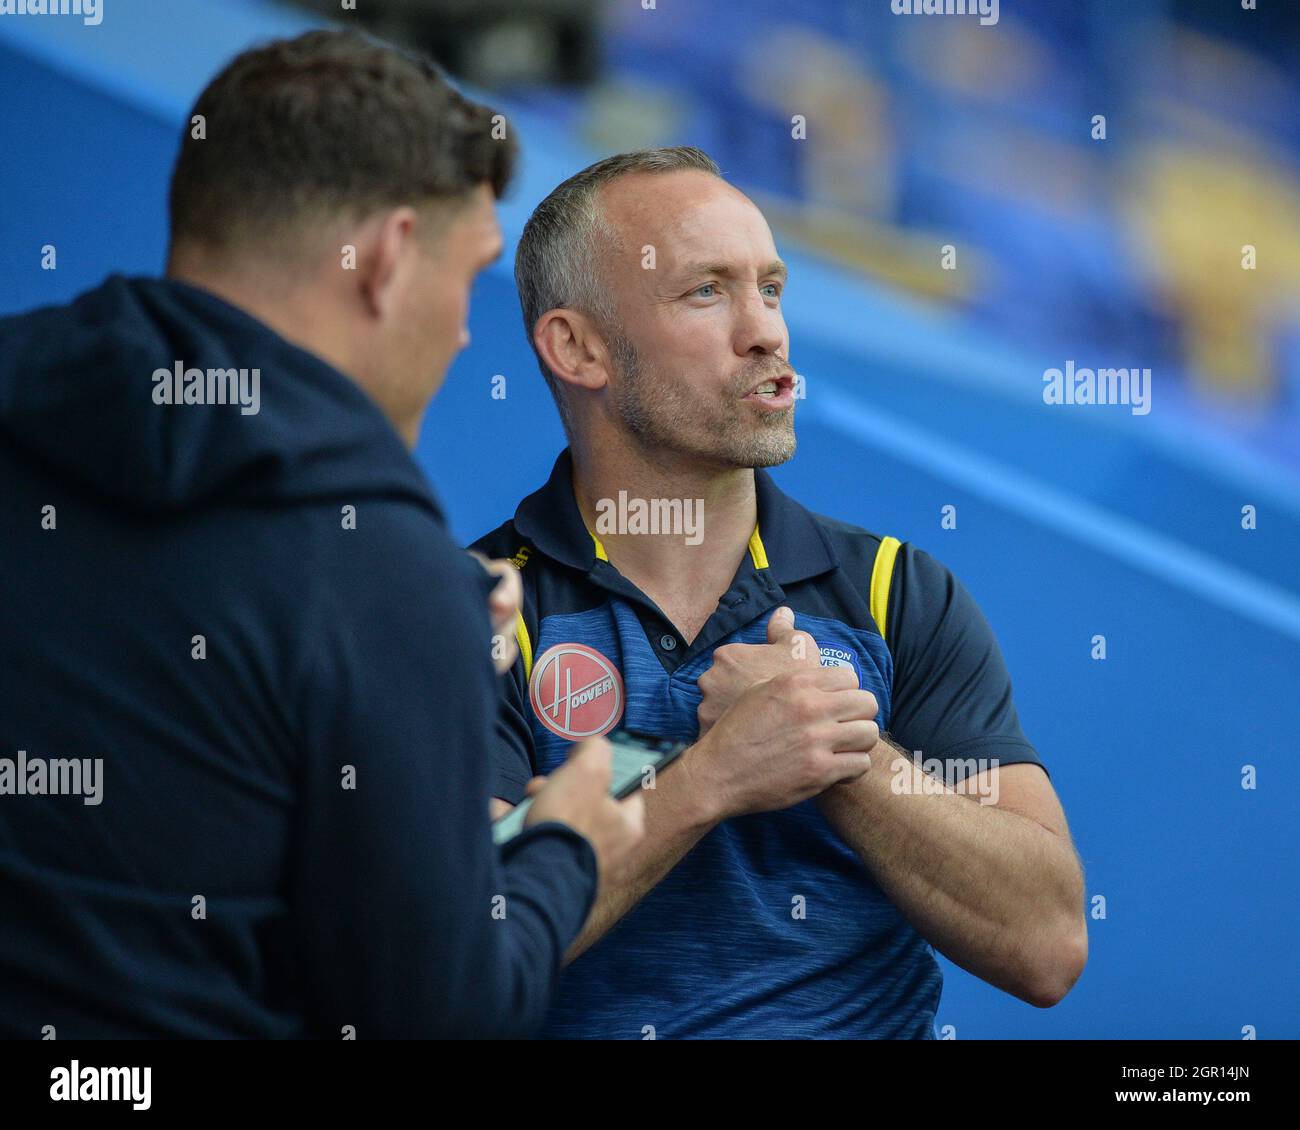 Warrington, England - 24 September 2021 - Warrington Wolves assistant coach Andrew Henderson before the Rugby League Betfred Super League, Elimination play-off, Warrington Wolves vs Hull Kingston Rovers at Halliwell Jones Stadium, Warrington, UK  Dean Williams Stock Photo